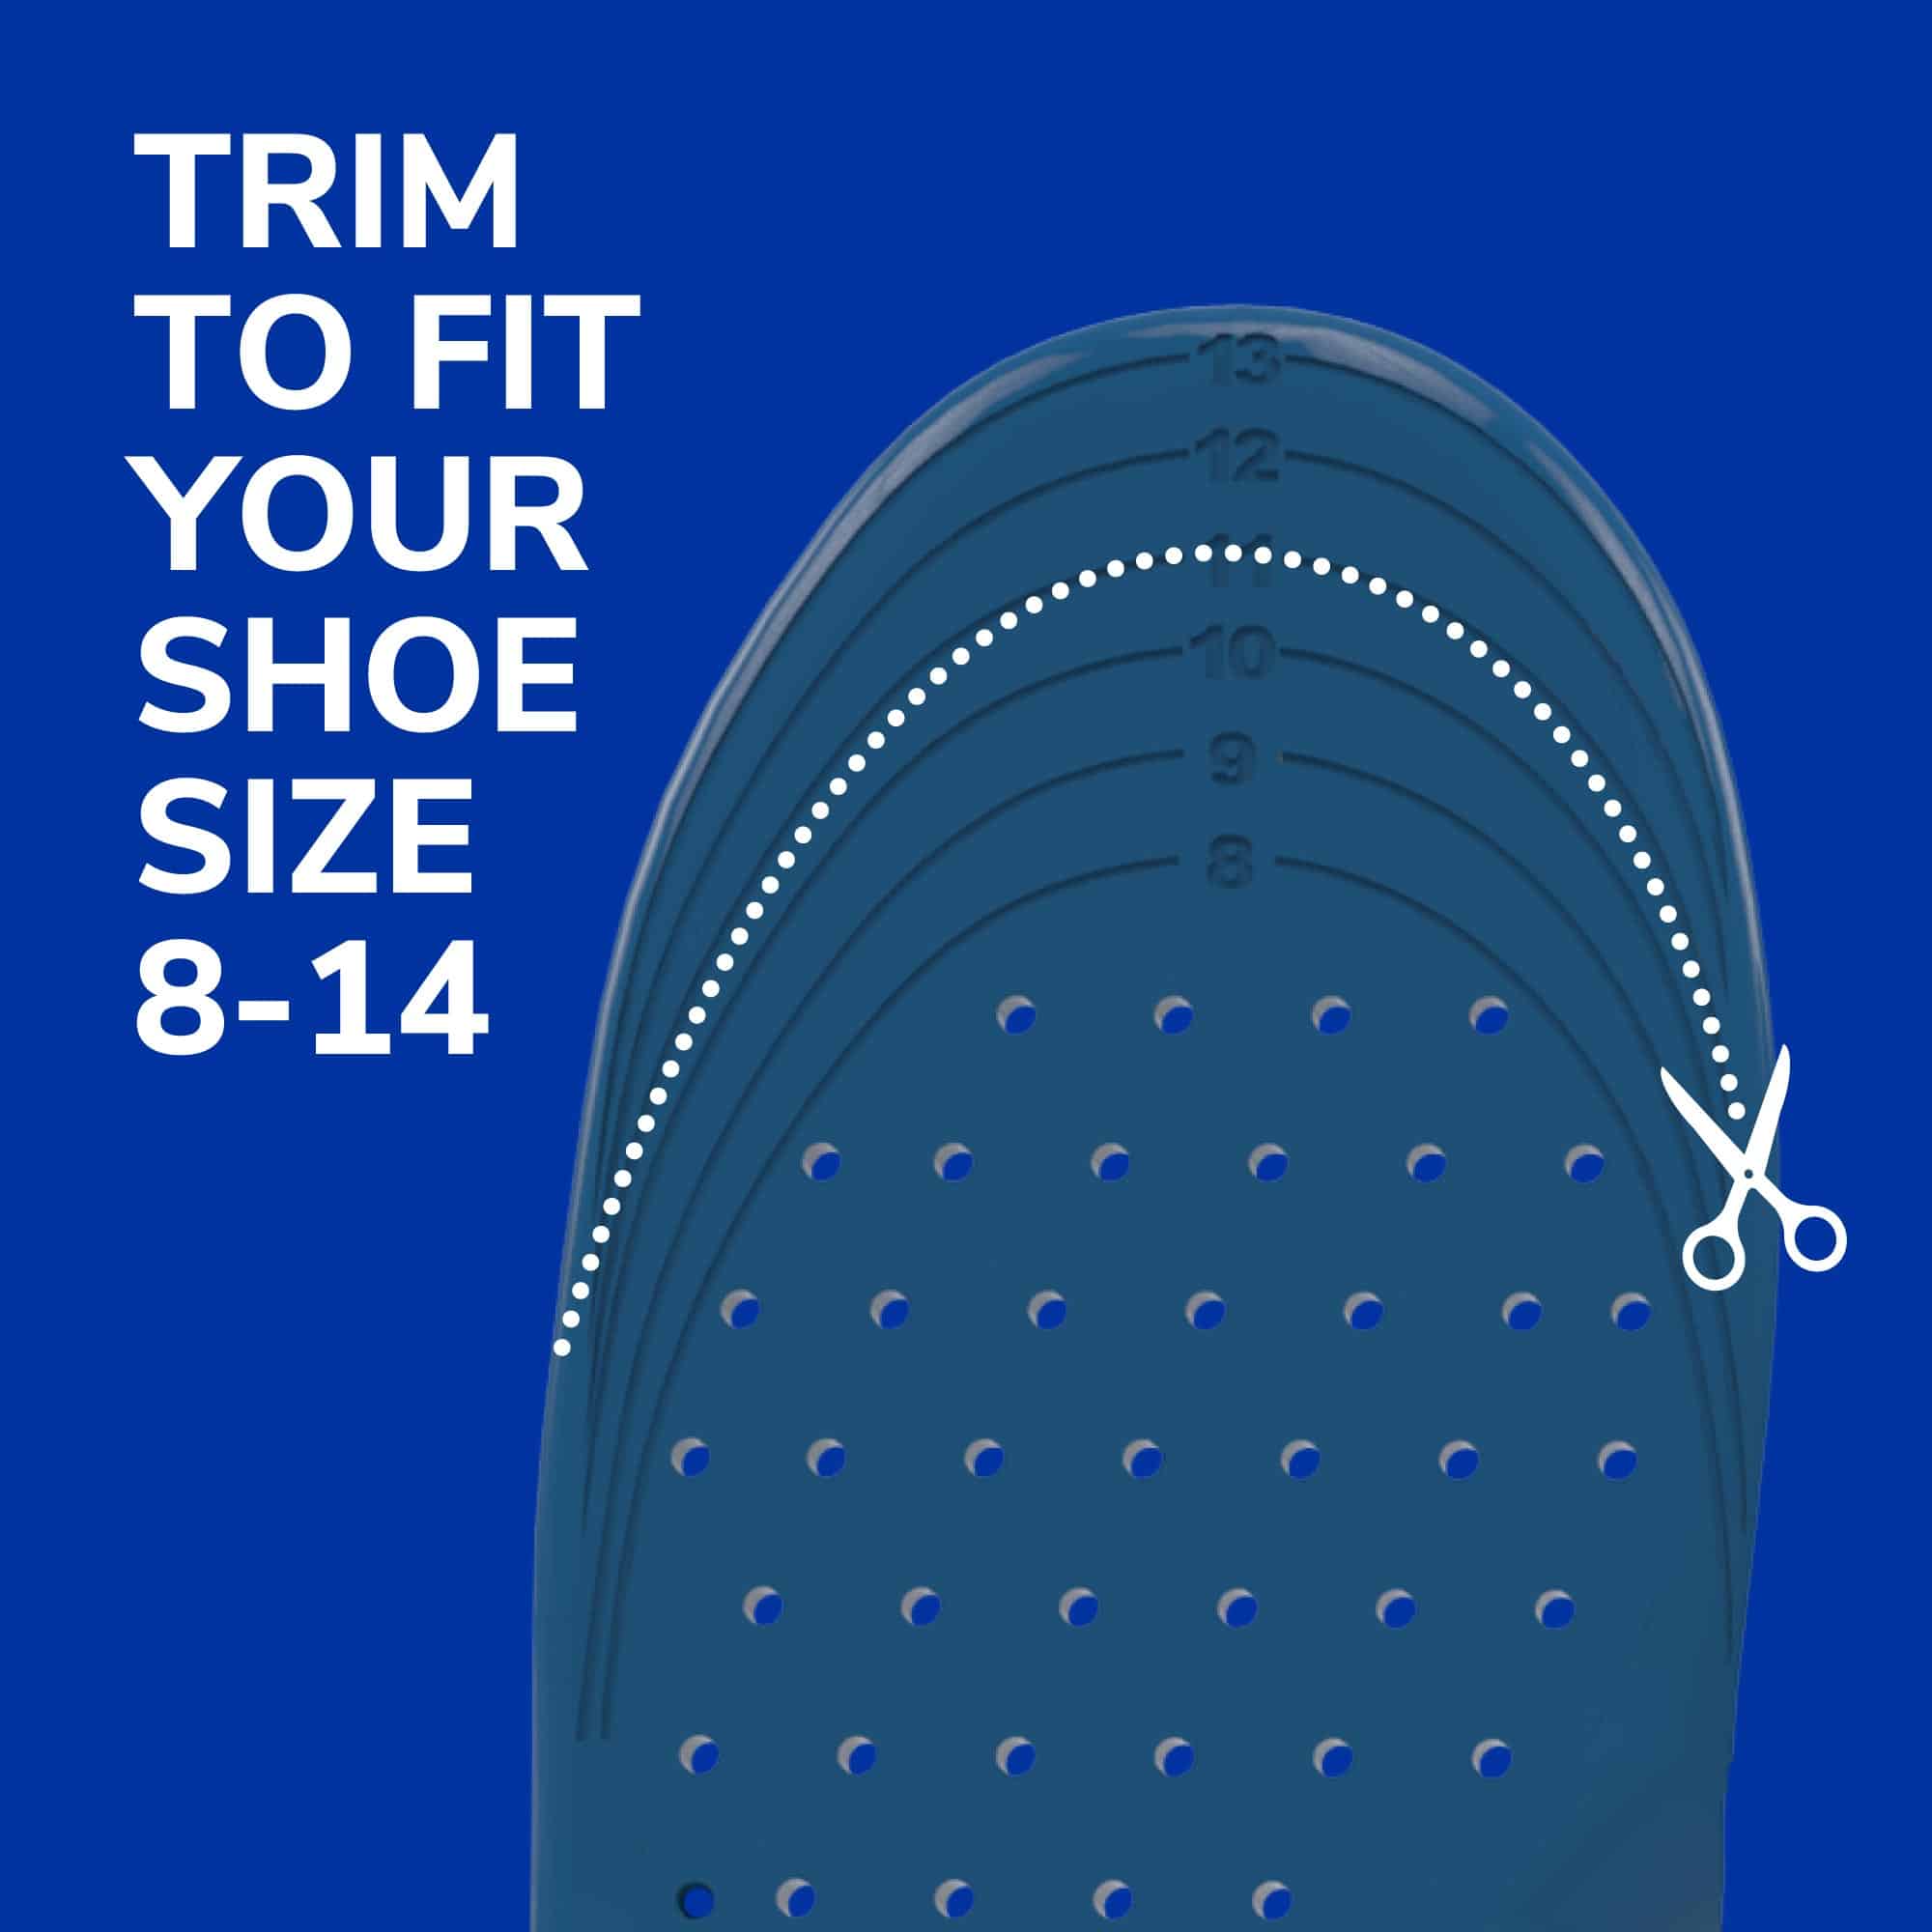 Can Insoles Be Trimmed To Fit Different Shoe Sizes?